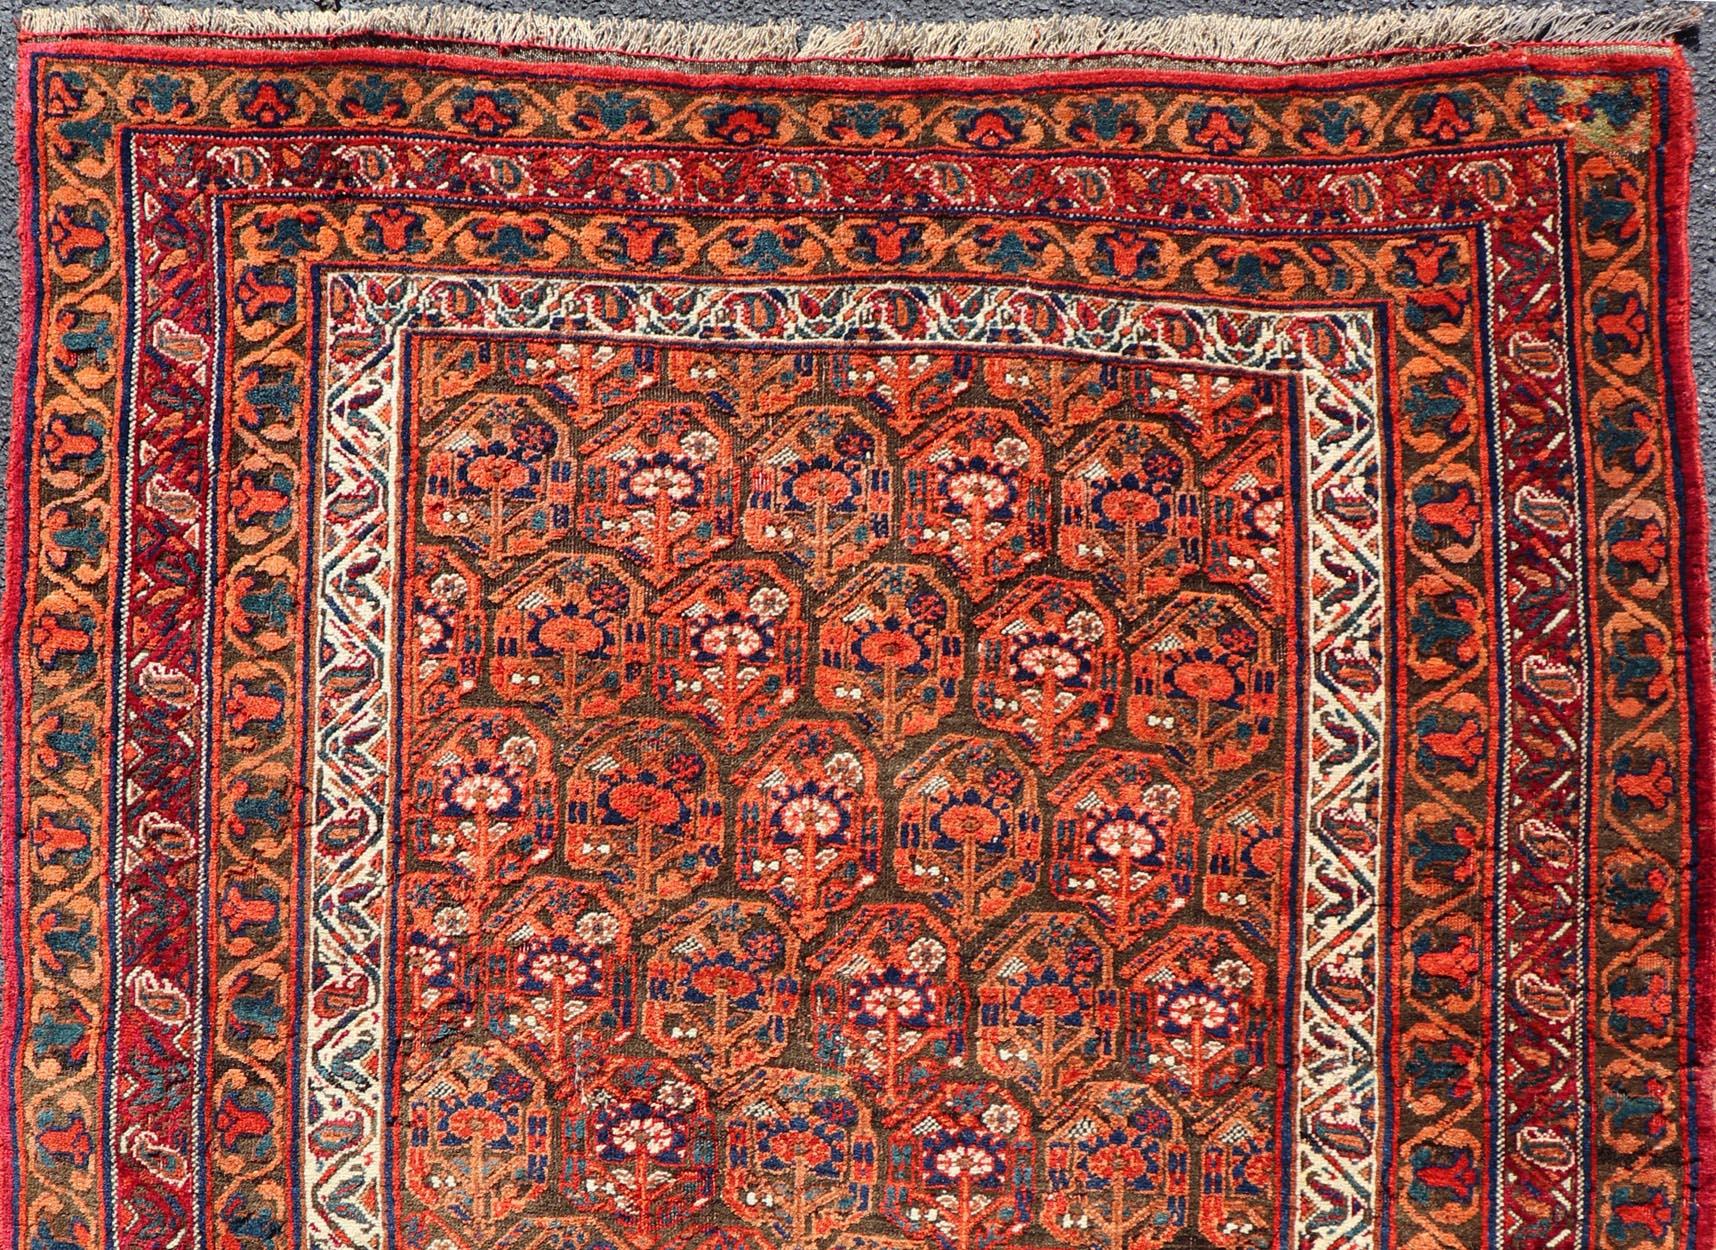 Wool  Fine Persian Antique Afshar Rug in Orange and Copper Background & Multi Colors For Sale